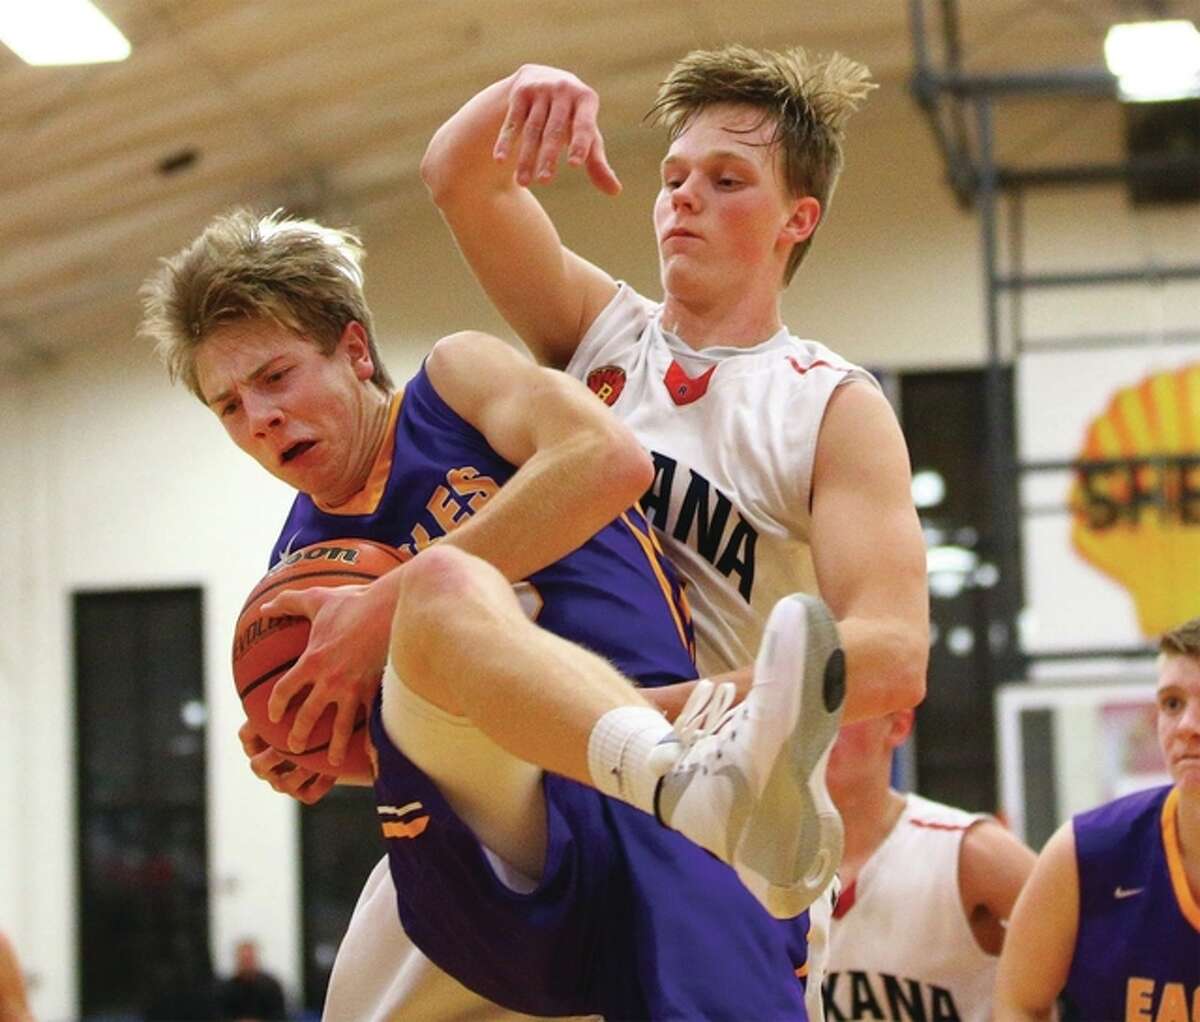 Civic Memorial’s David Lane (front) scored 13 points to help his team beat rival Roxana 65-32 Friday night in Bethalto. He is shown rebounding in front of Roxana’s Cody McMillen in action last season. McMillen scored 12 points for the Shells Friday.